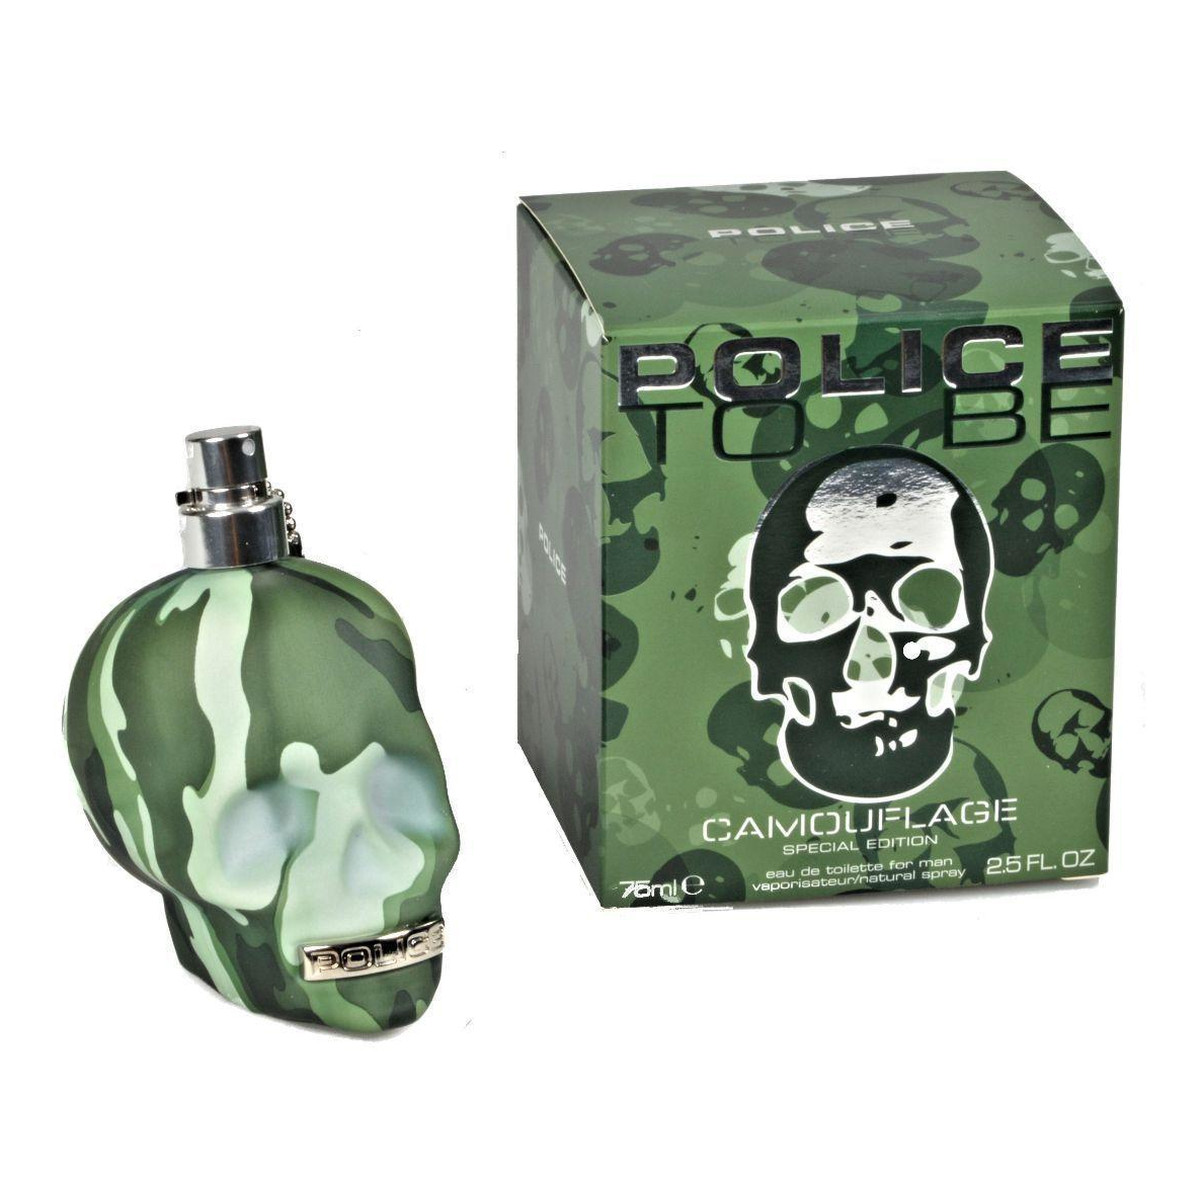 Police To Be Man Camouflage Special Edition woda toaletowa 75ml